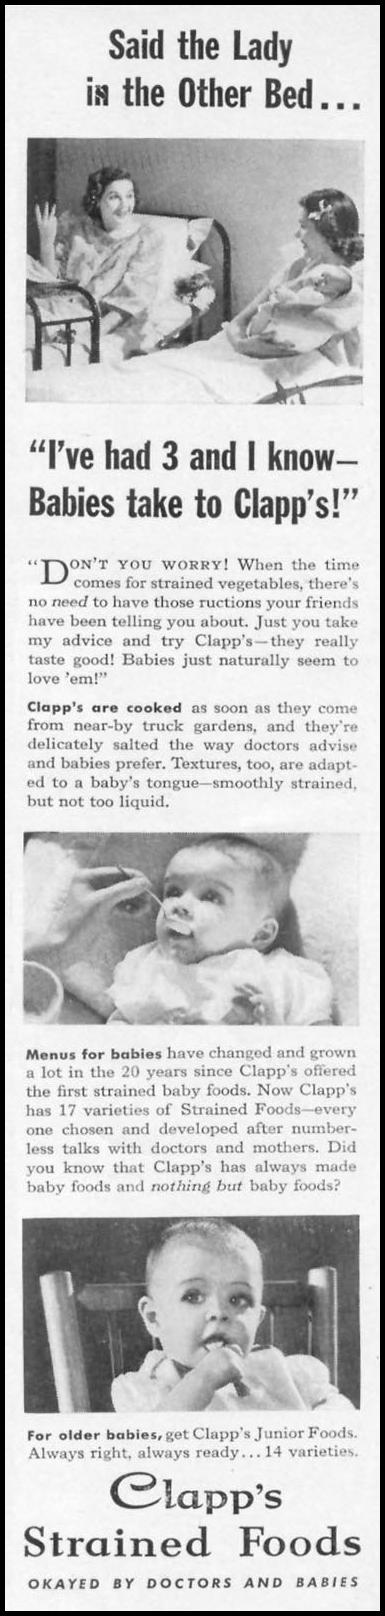 CLAPP'S BABY FOODS
WOMAN'S DAY
04/01/1941
p. 7